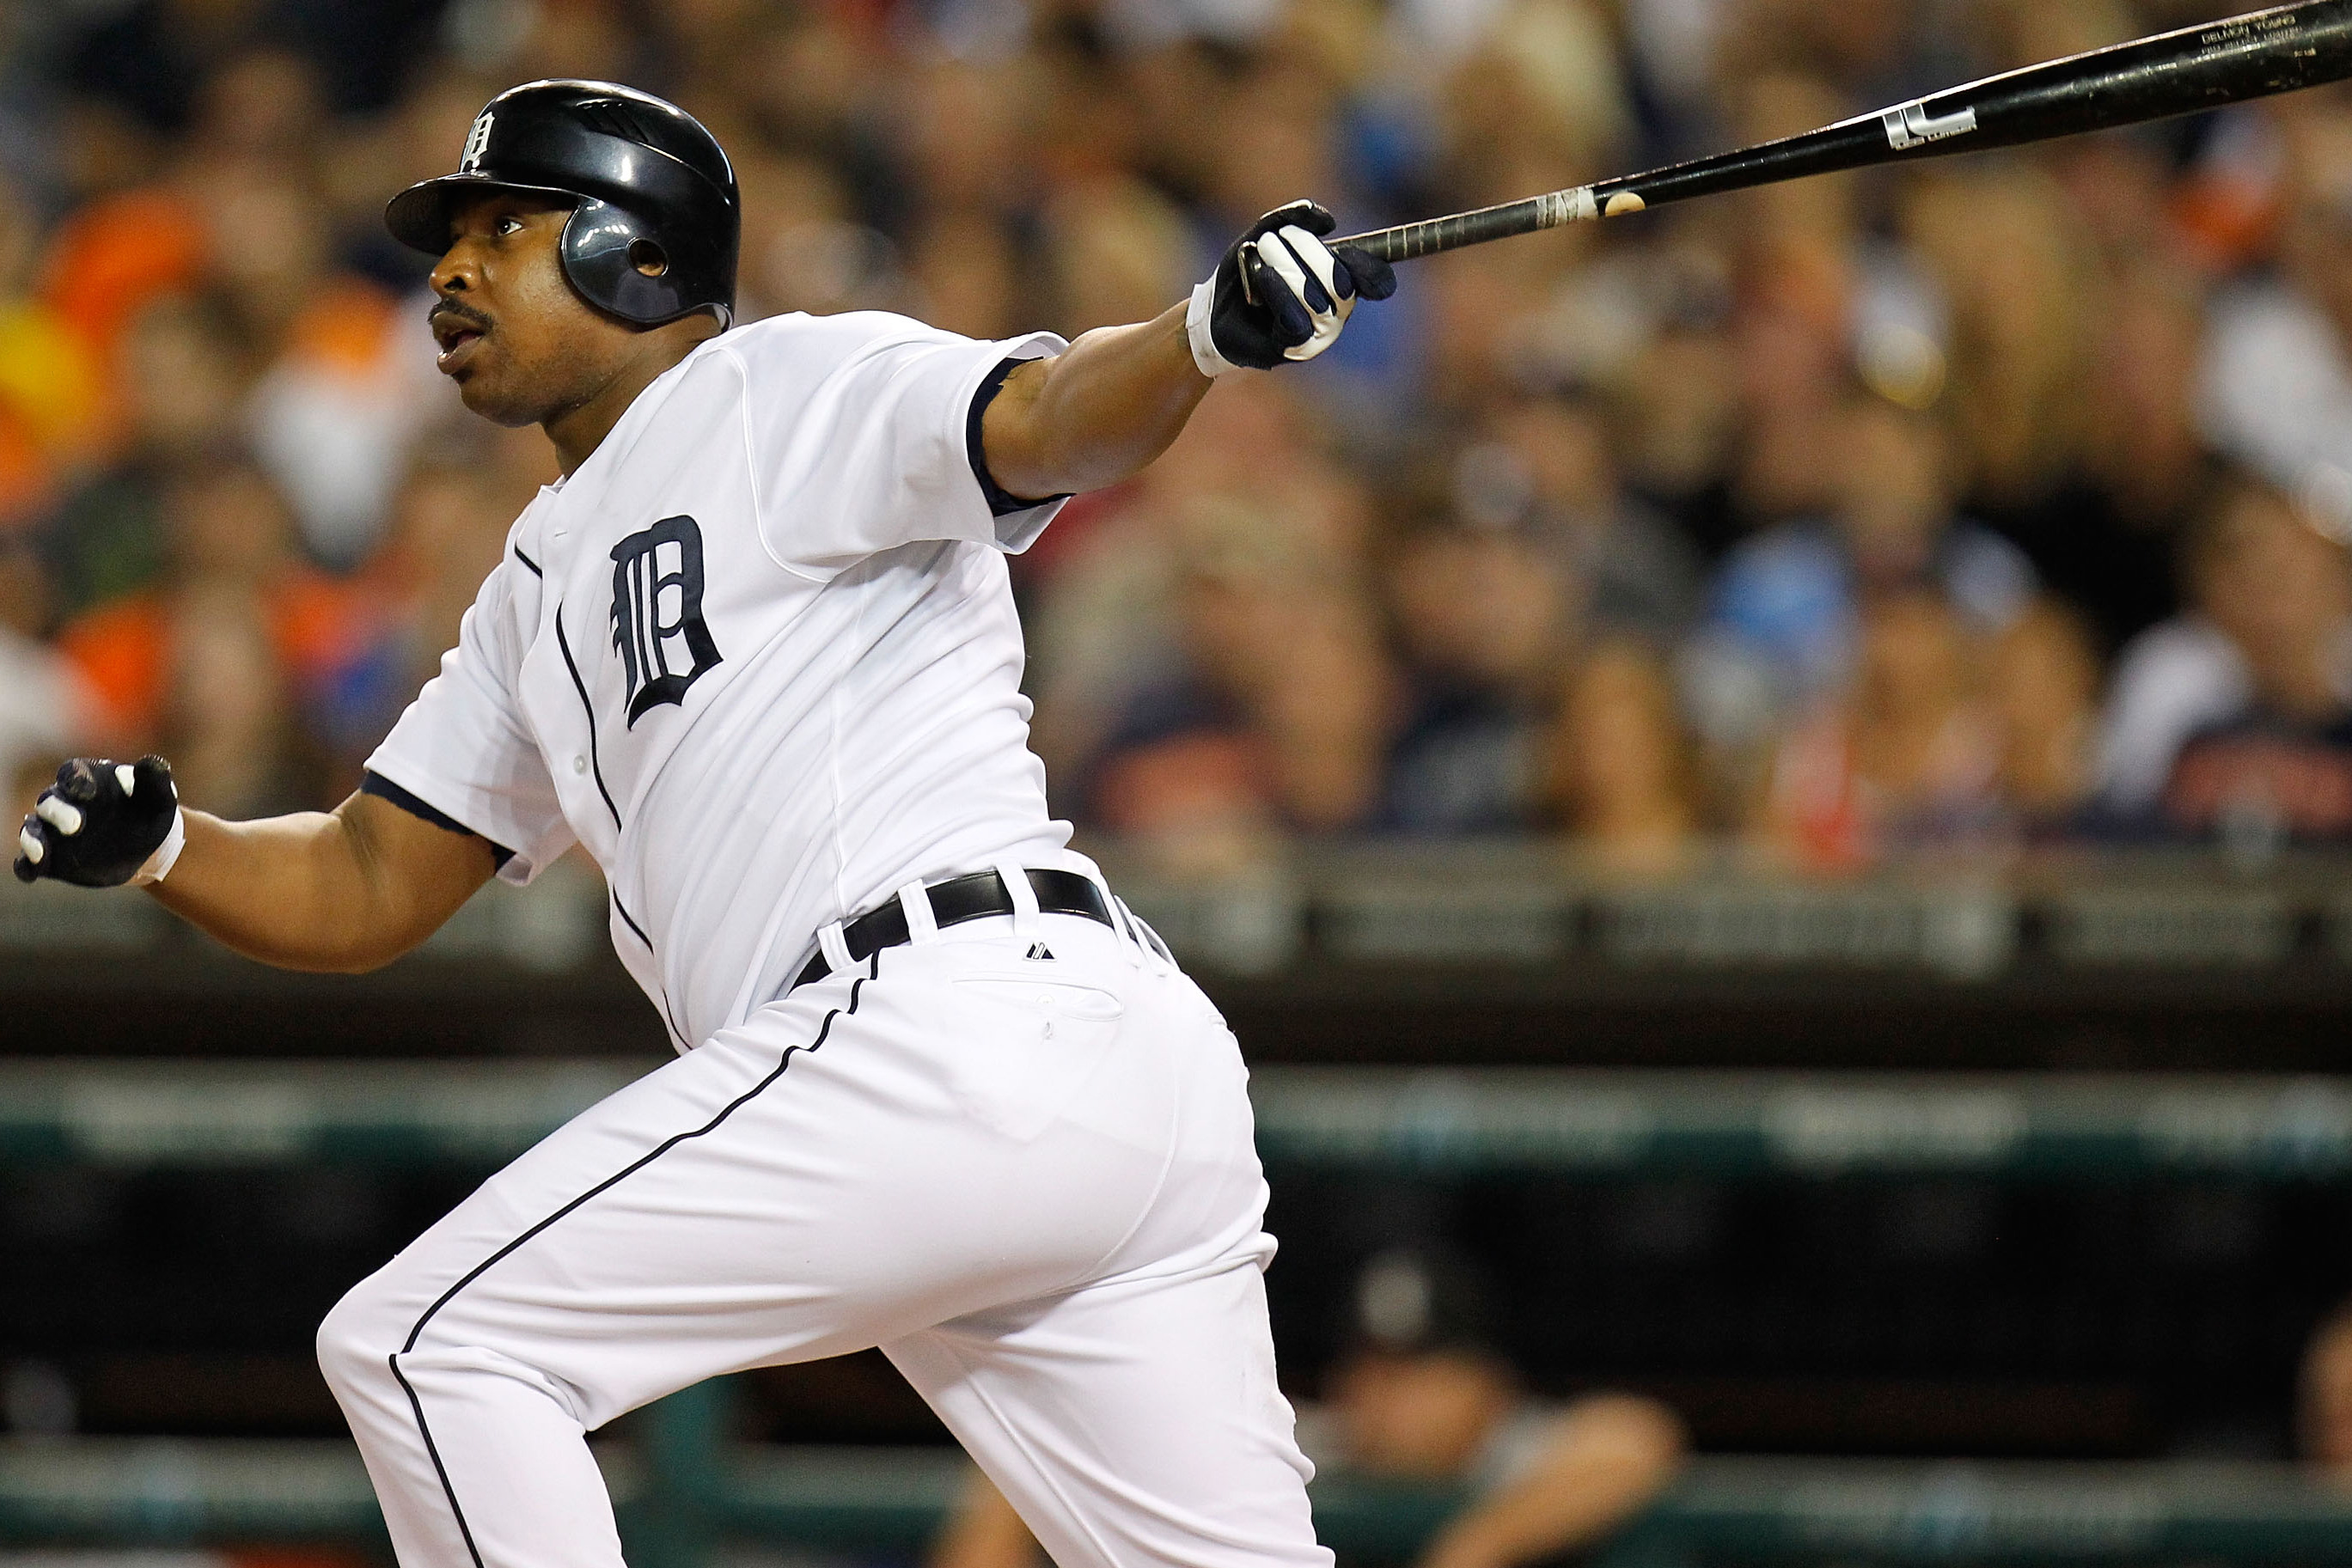 White Sox bats come alive in 12-3 romp over Tigers